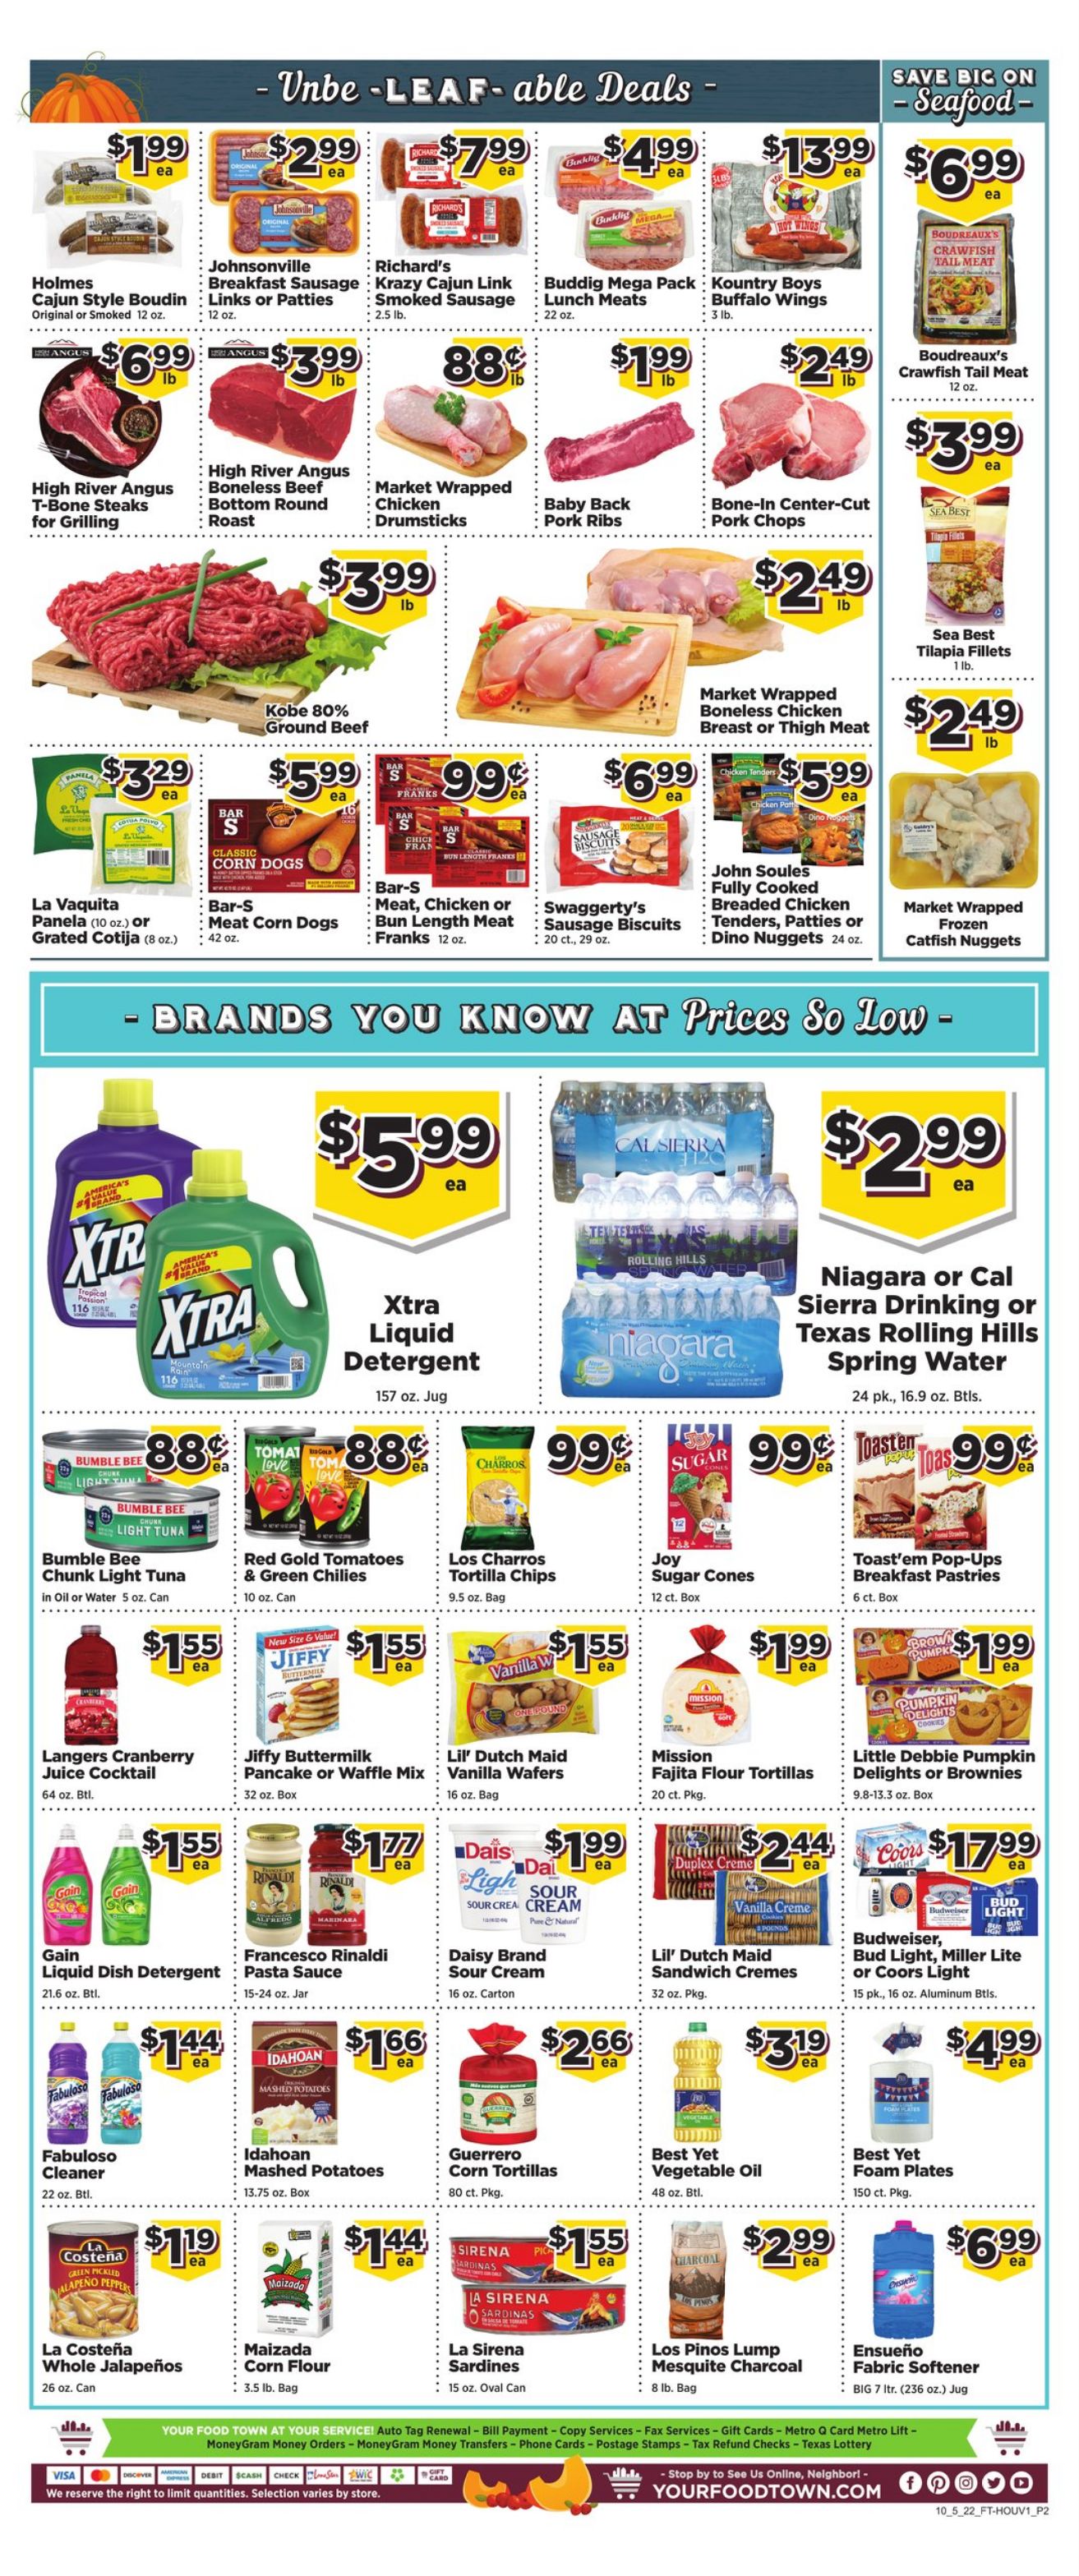 Weekly ad Your Food Town 10/05/2022 - 10/11/2022